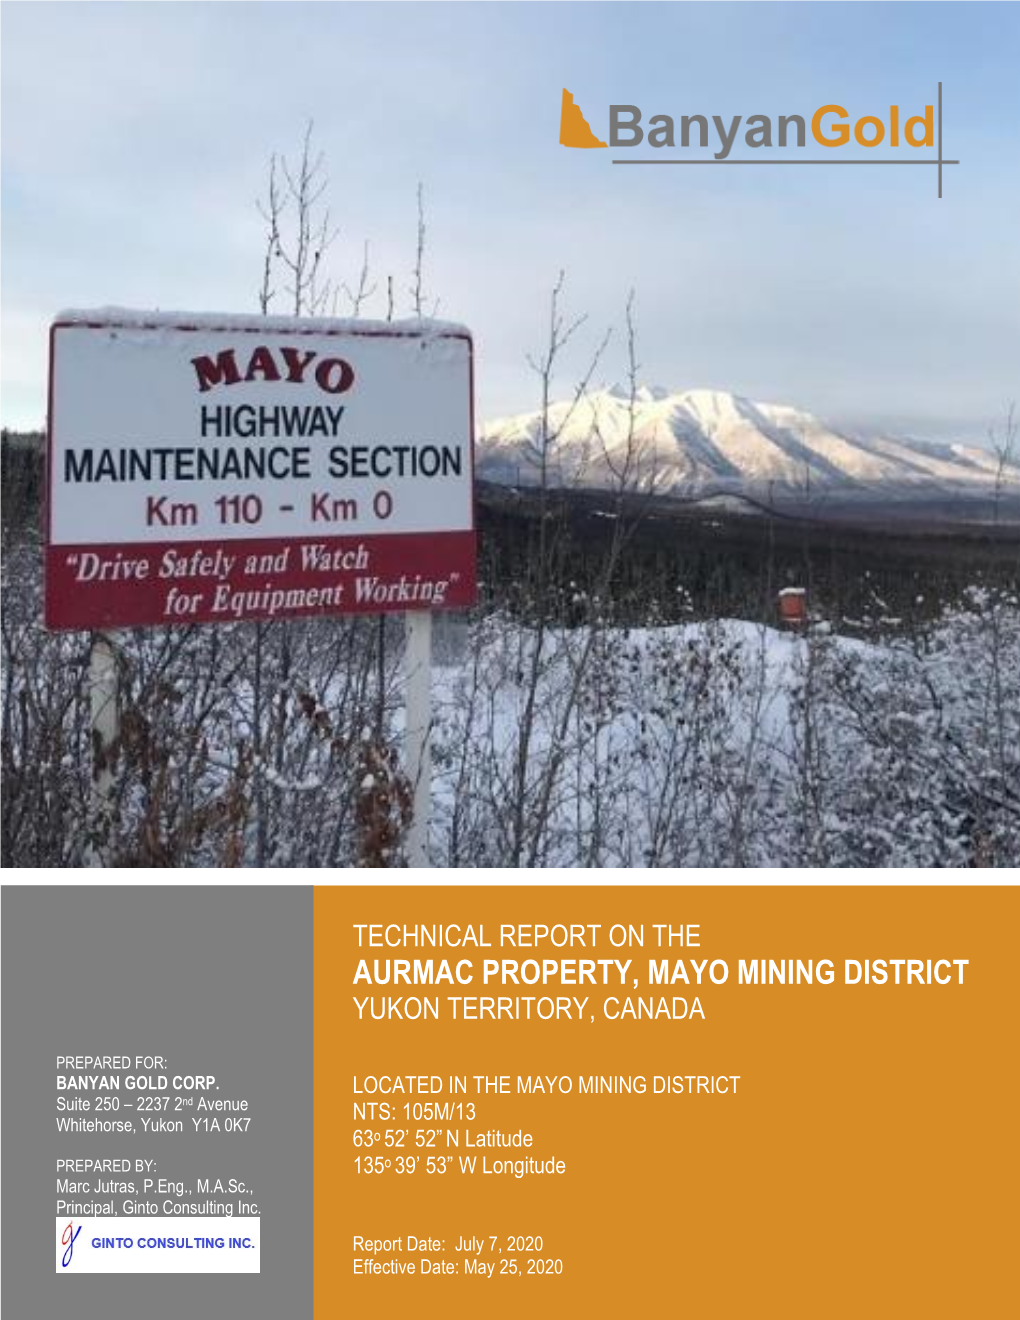 Technical Report on the Aurmac Property, Mayo Mining District Yukon Territory, Canada